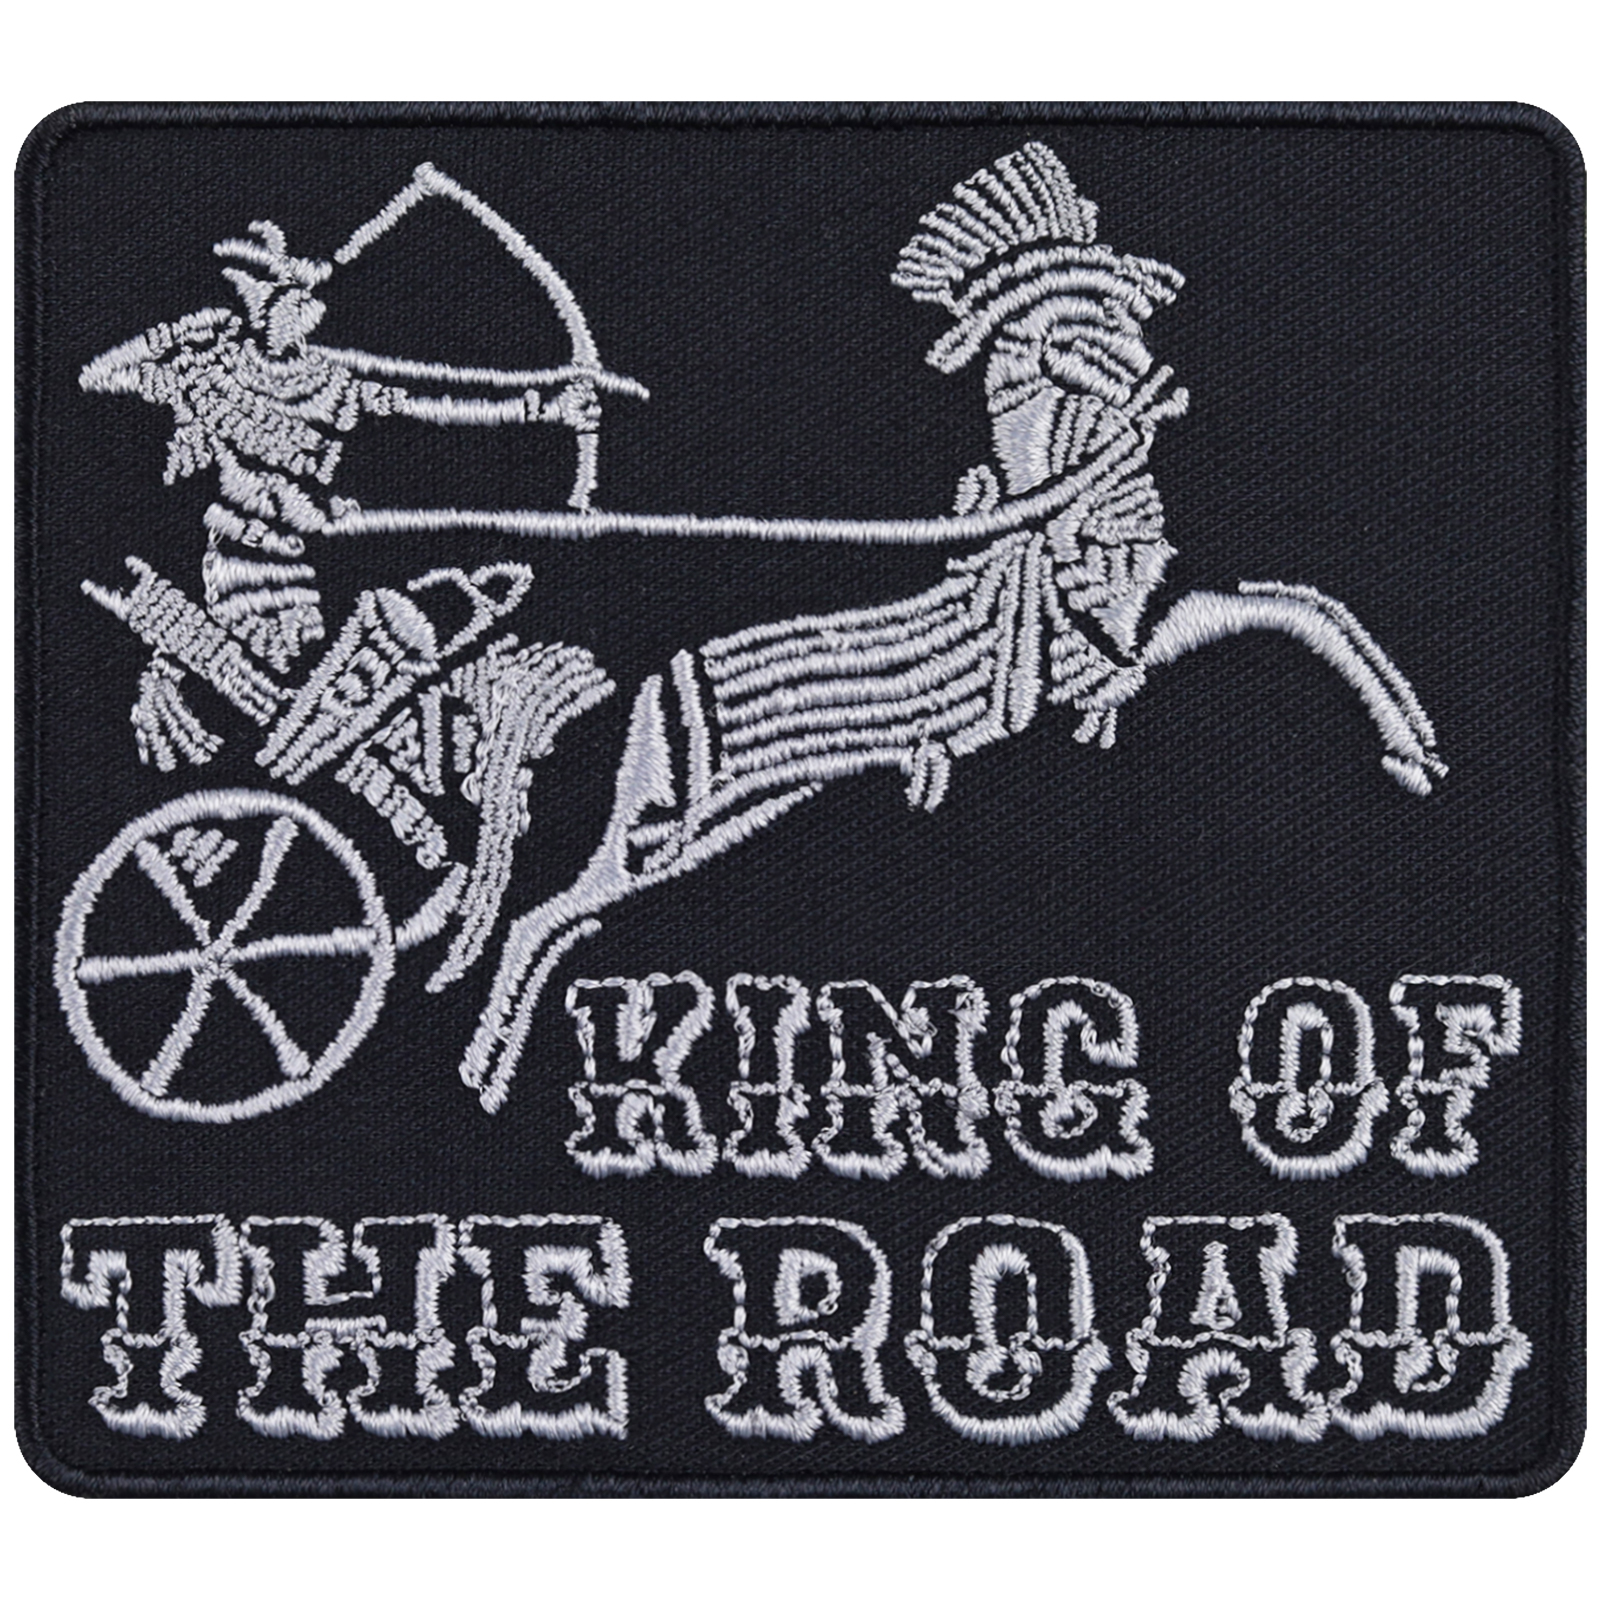 King of the road - Patch